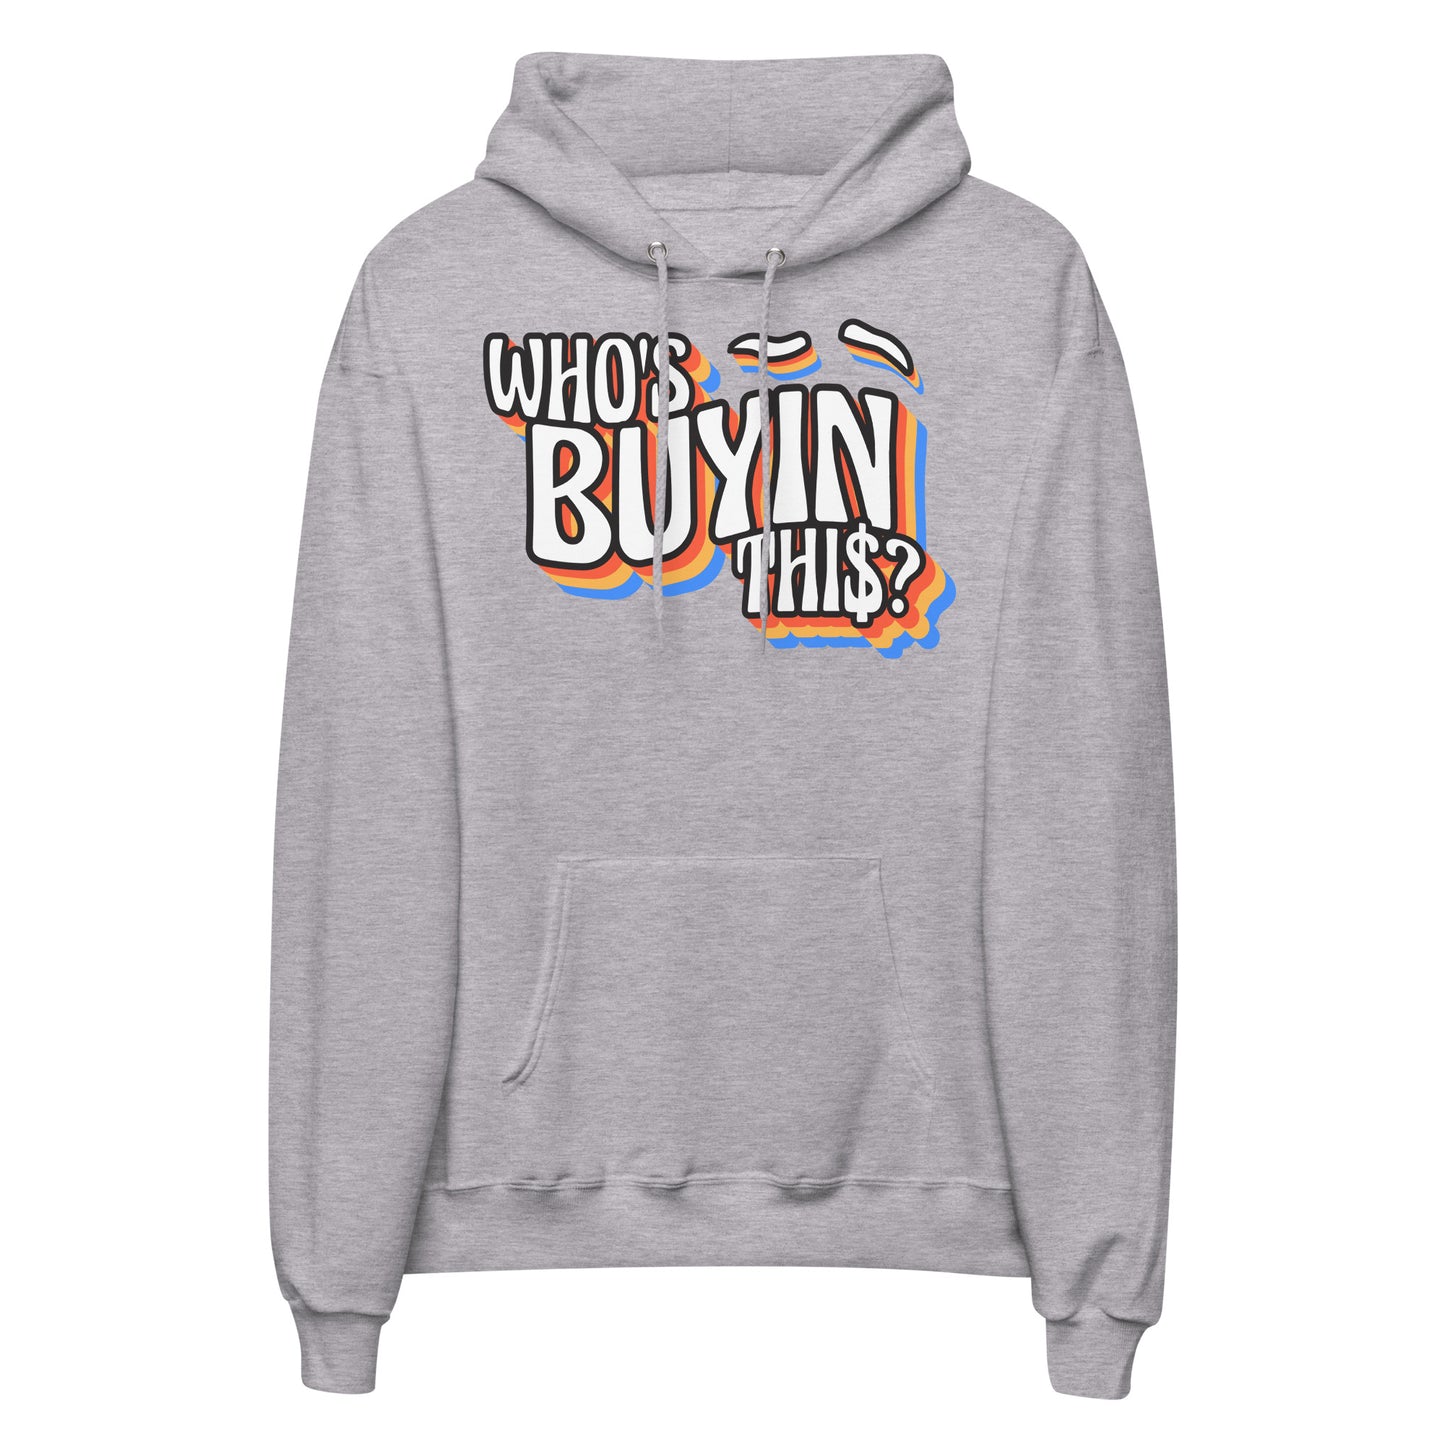 who's buyin this? hoodie